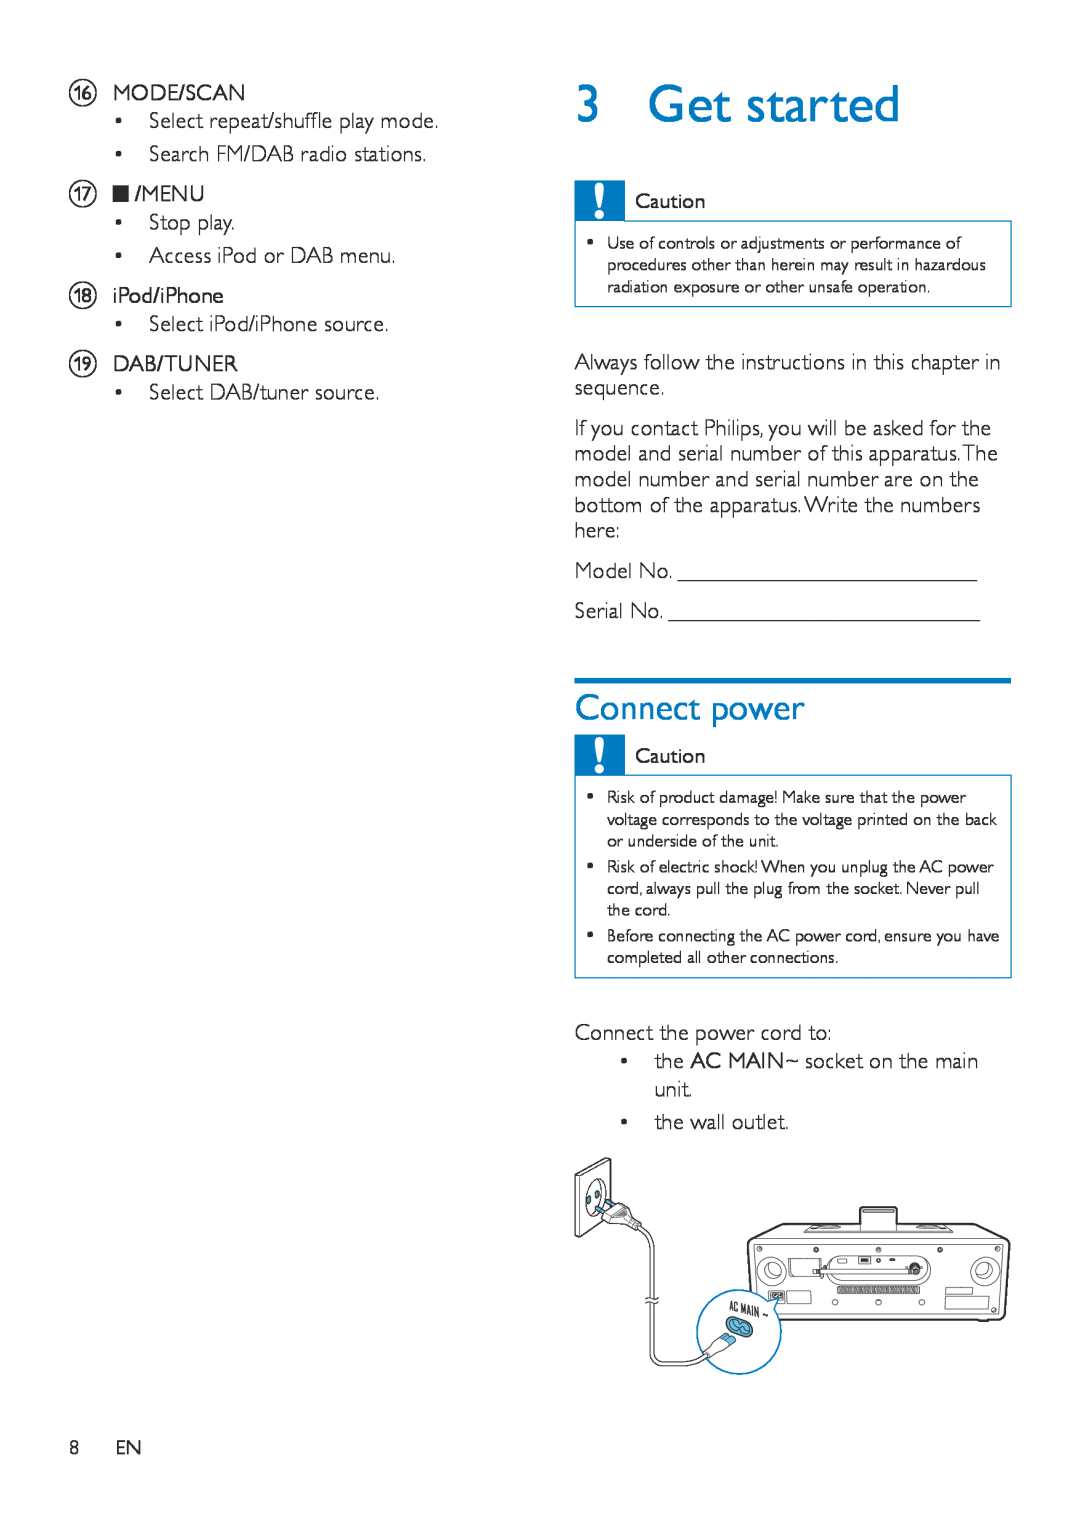 Philips DTB855 user manual Get started, Connect power 